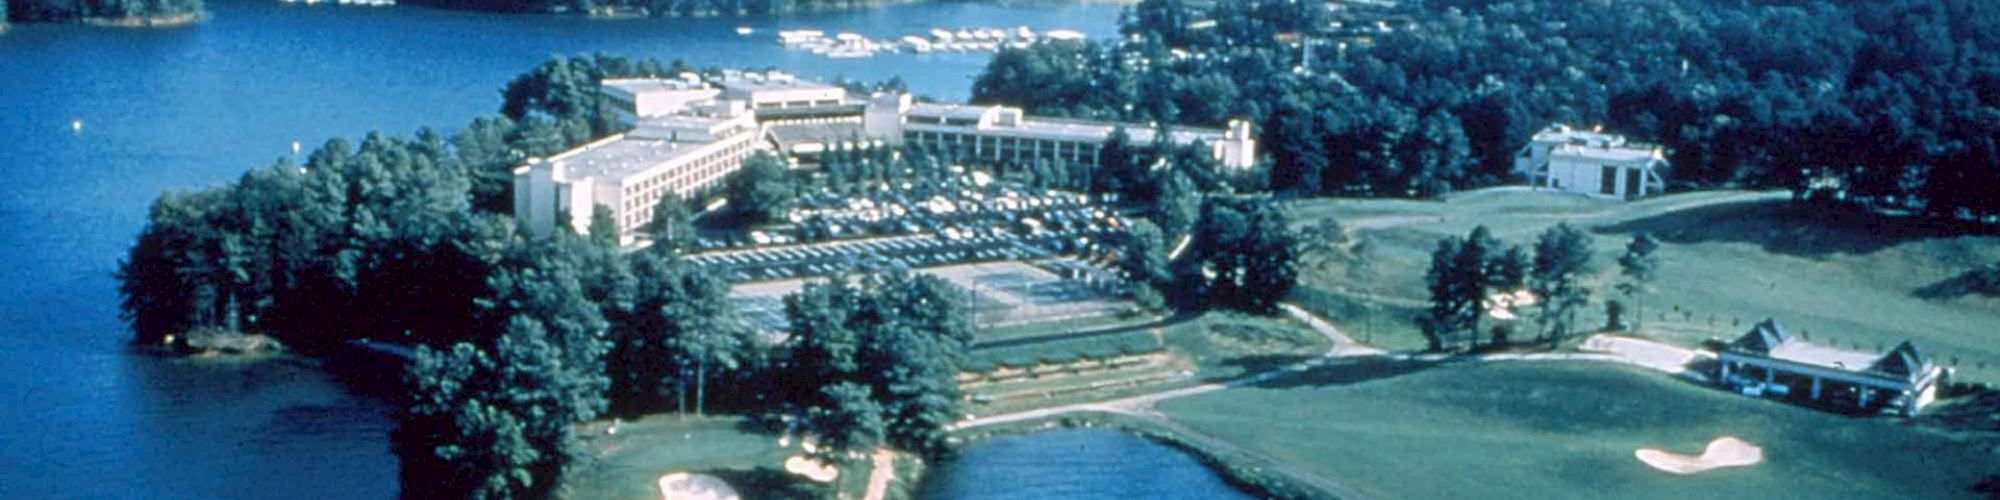 An aerial view of a lakeside resort complex featuring a large building, surrounding wooded areas, a golf course, and multiple water bodies ending the sentence.